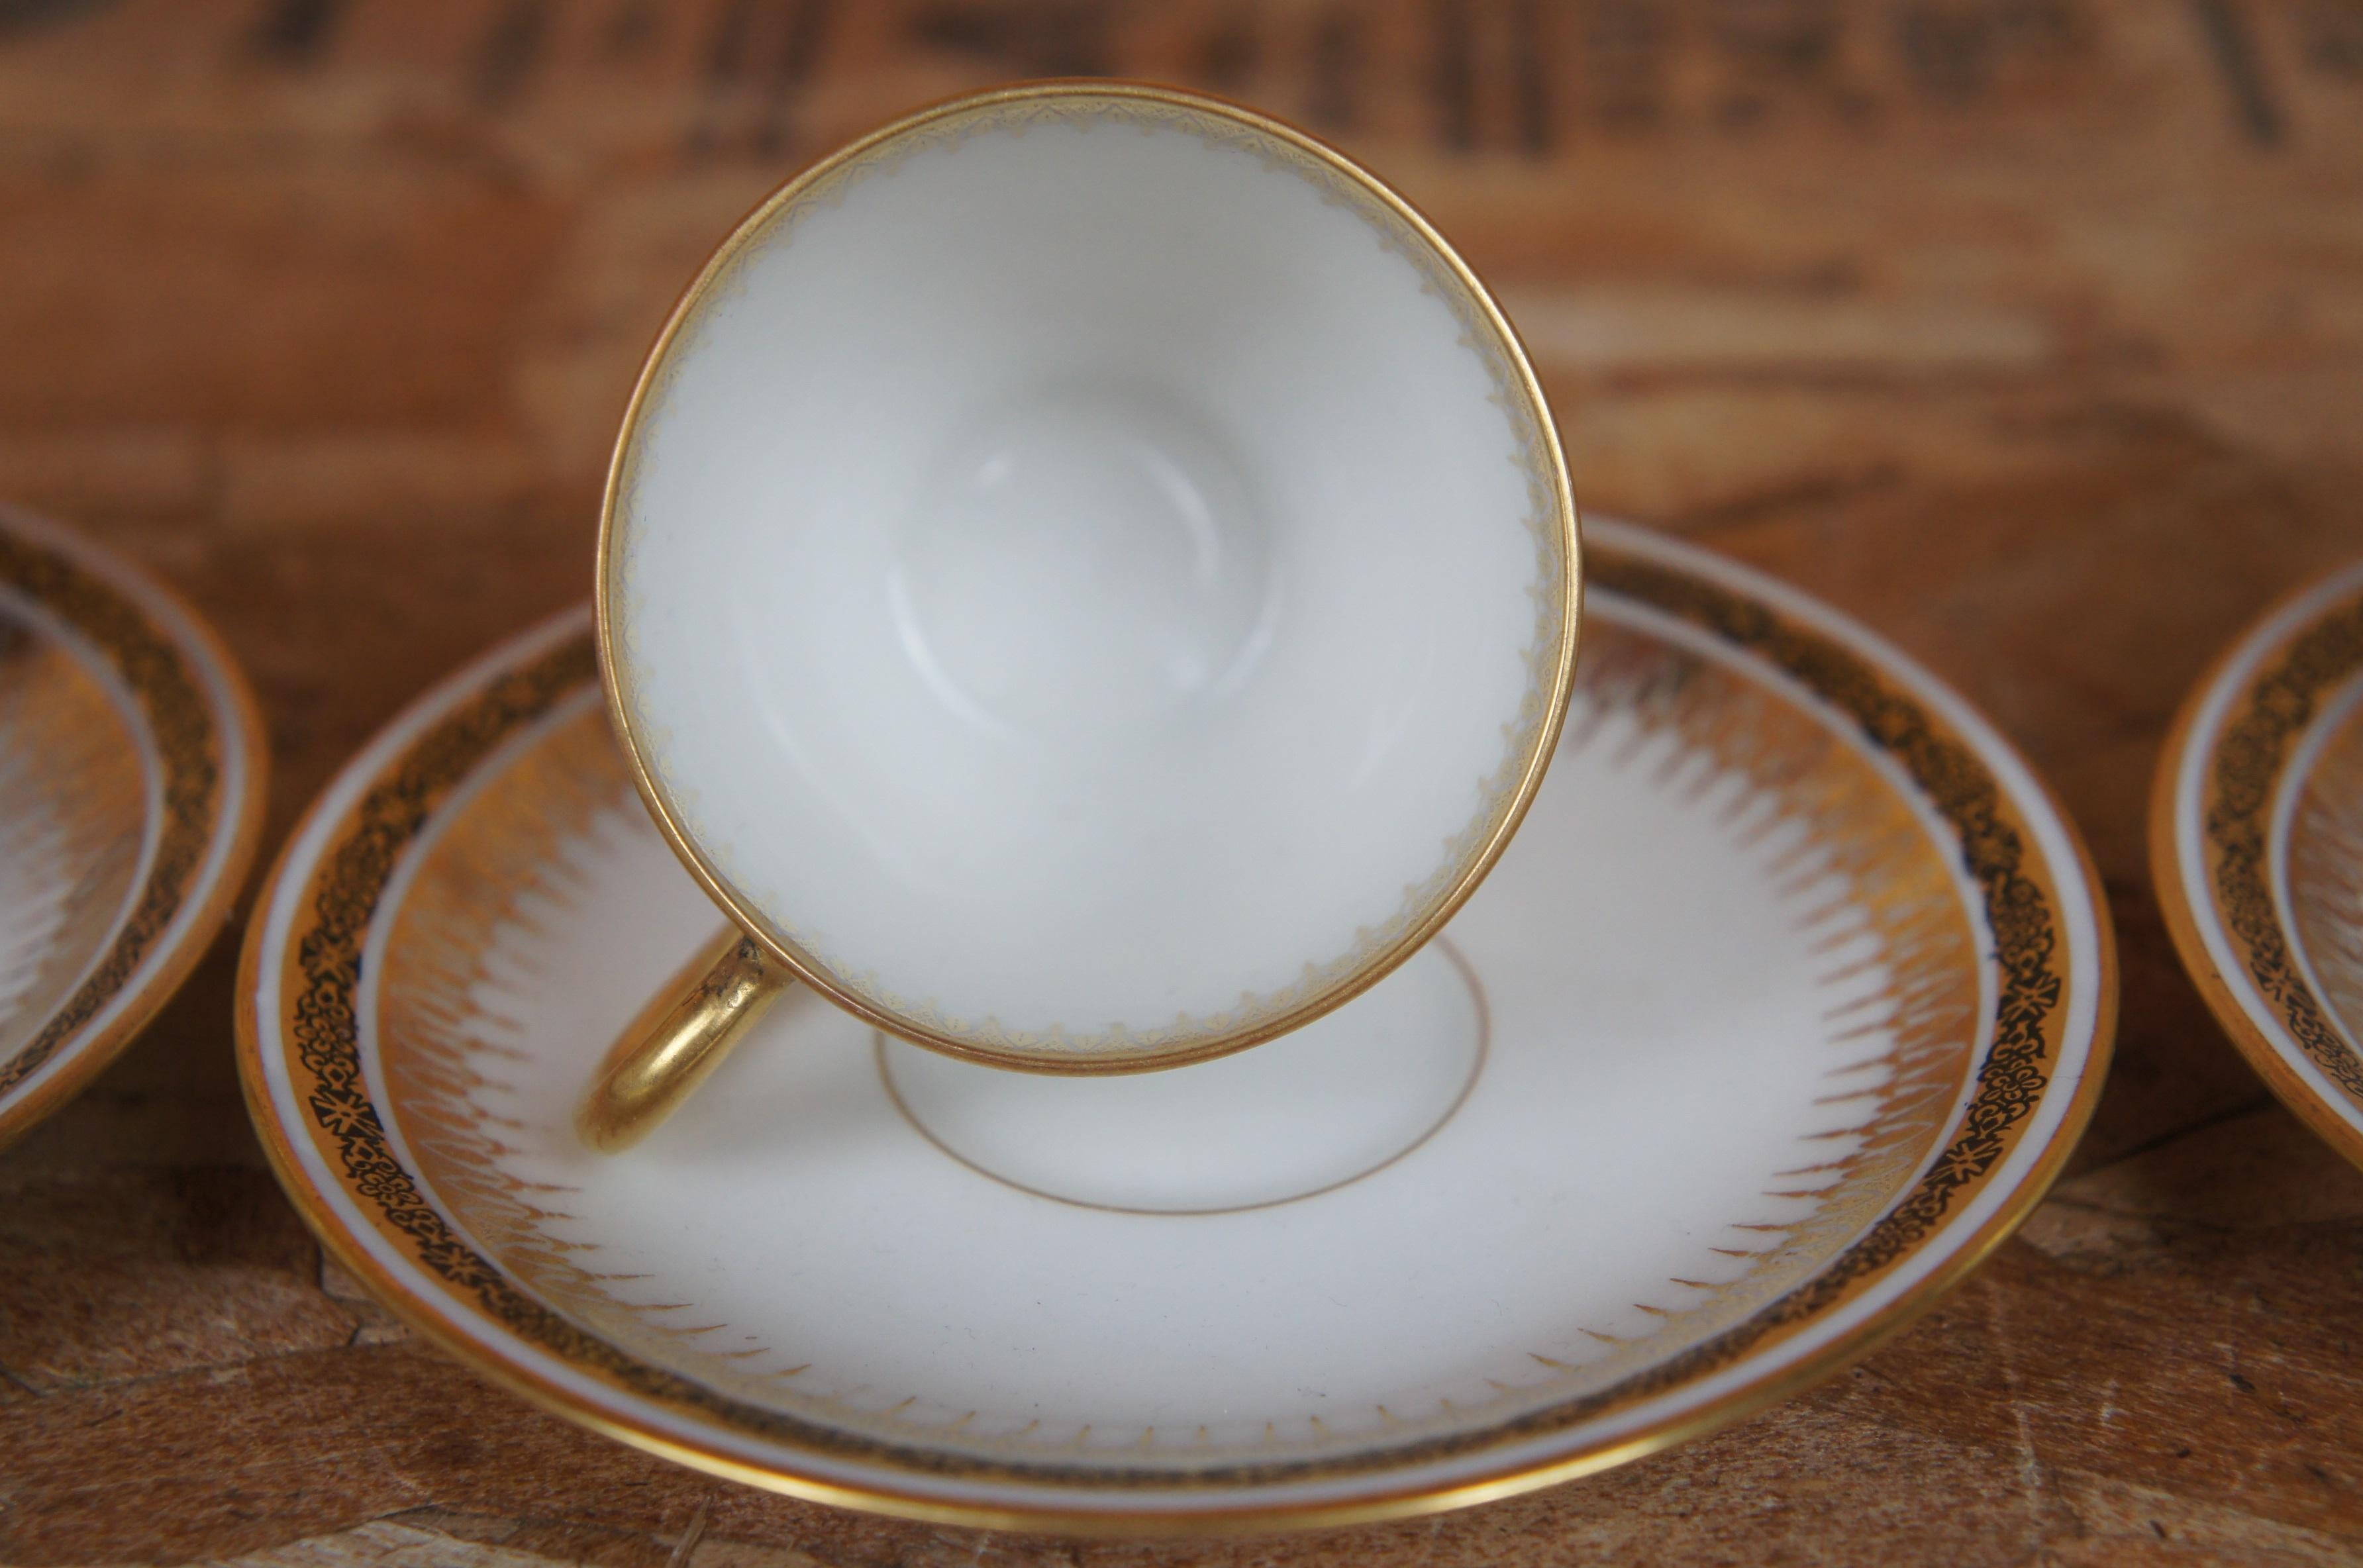 4 Antique French Pouyat Limoges Ivory Gold Demitasse Tea Coffee Cups Saucers 6